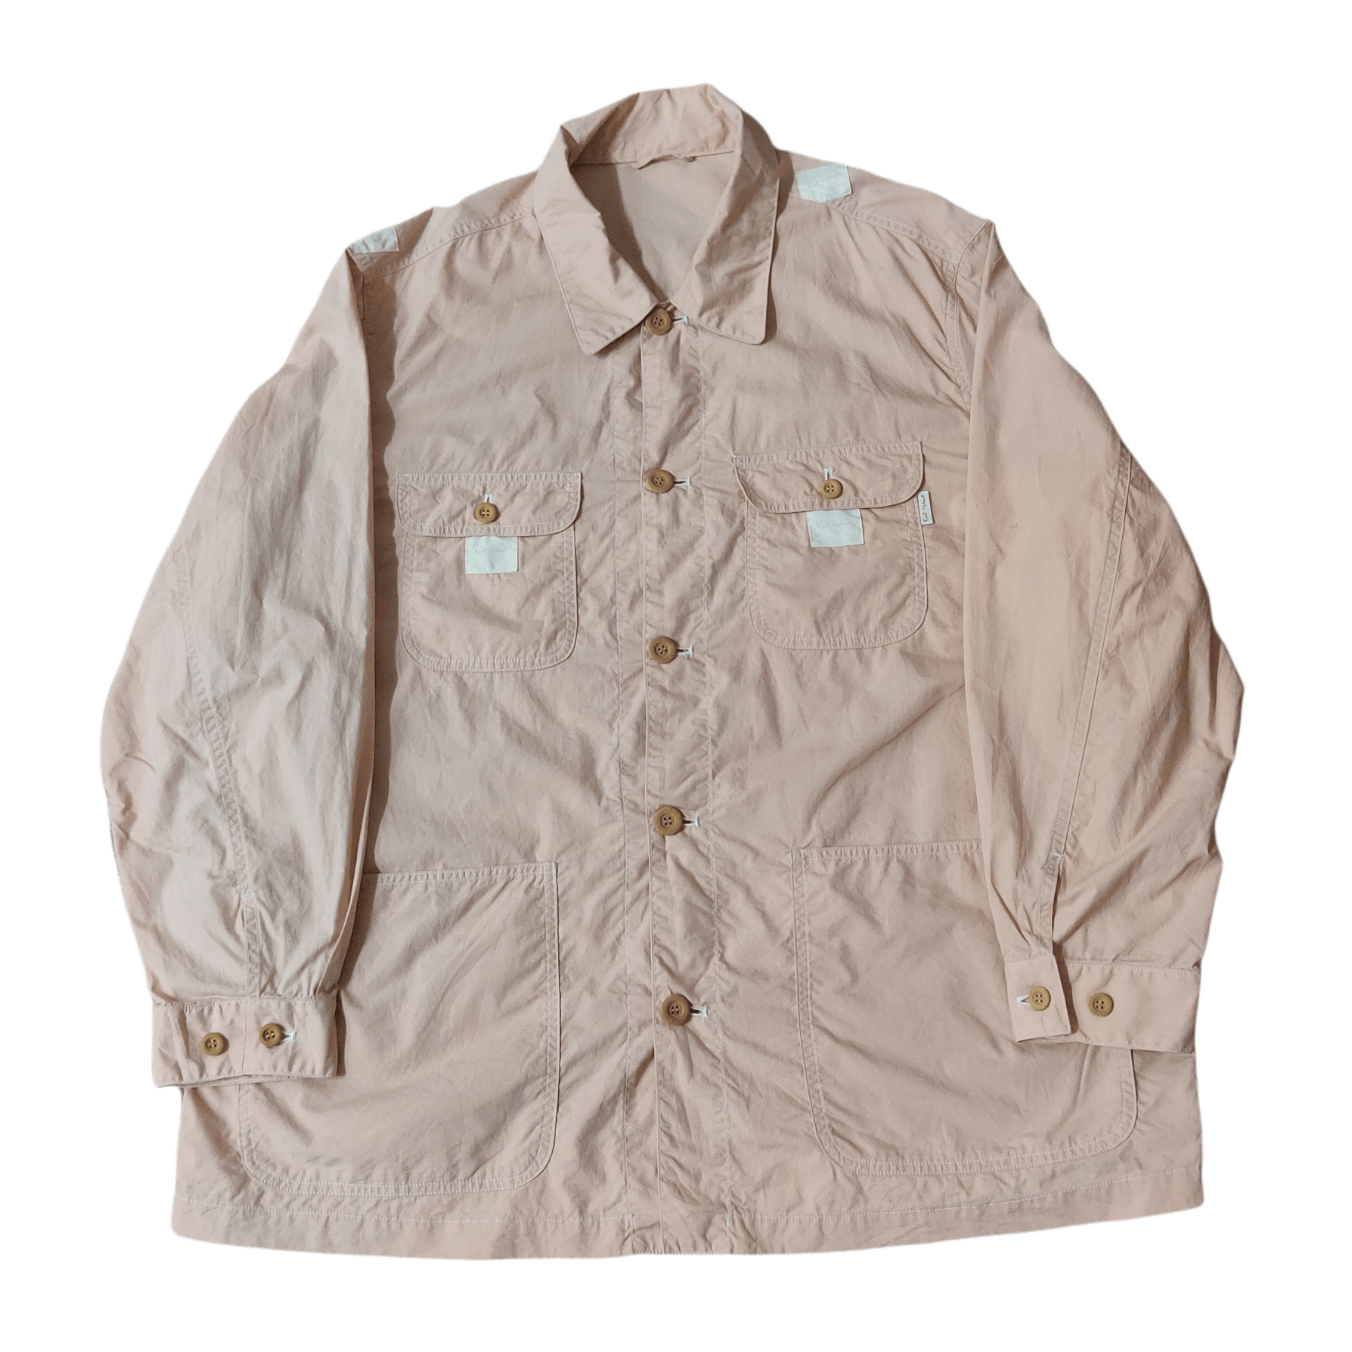 Vintage Karl Helmut Patches Shirt Button Up - 3